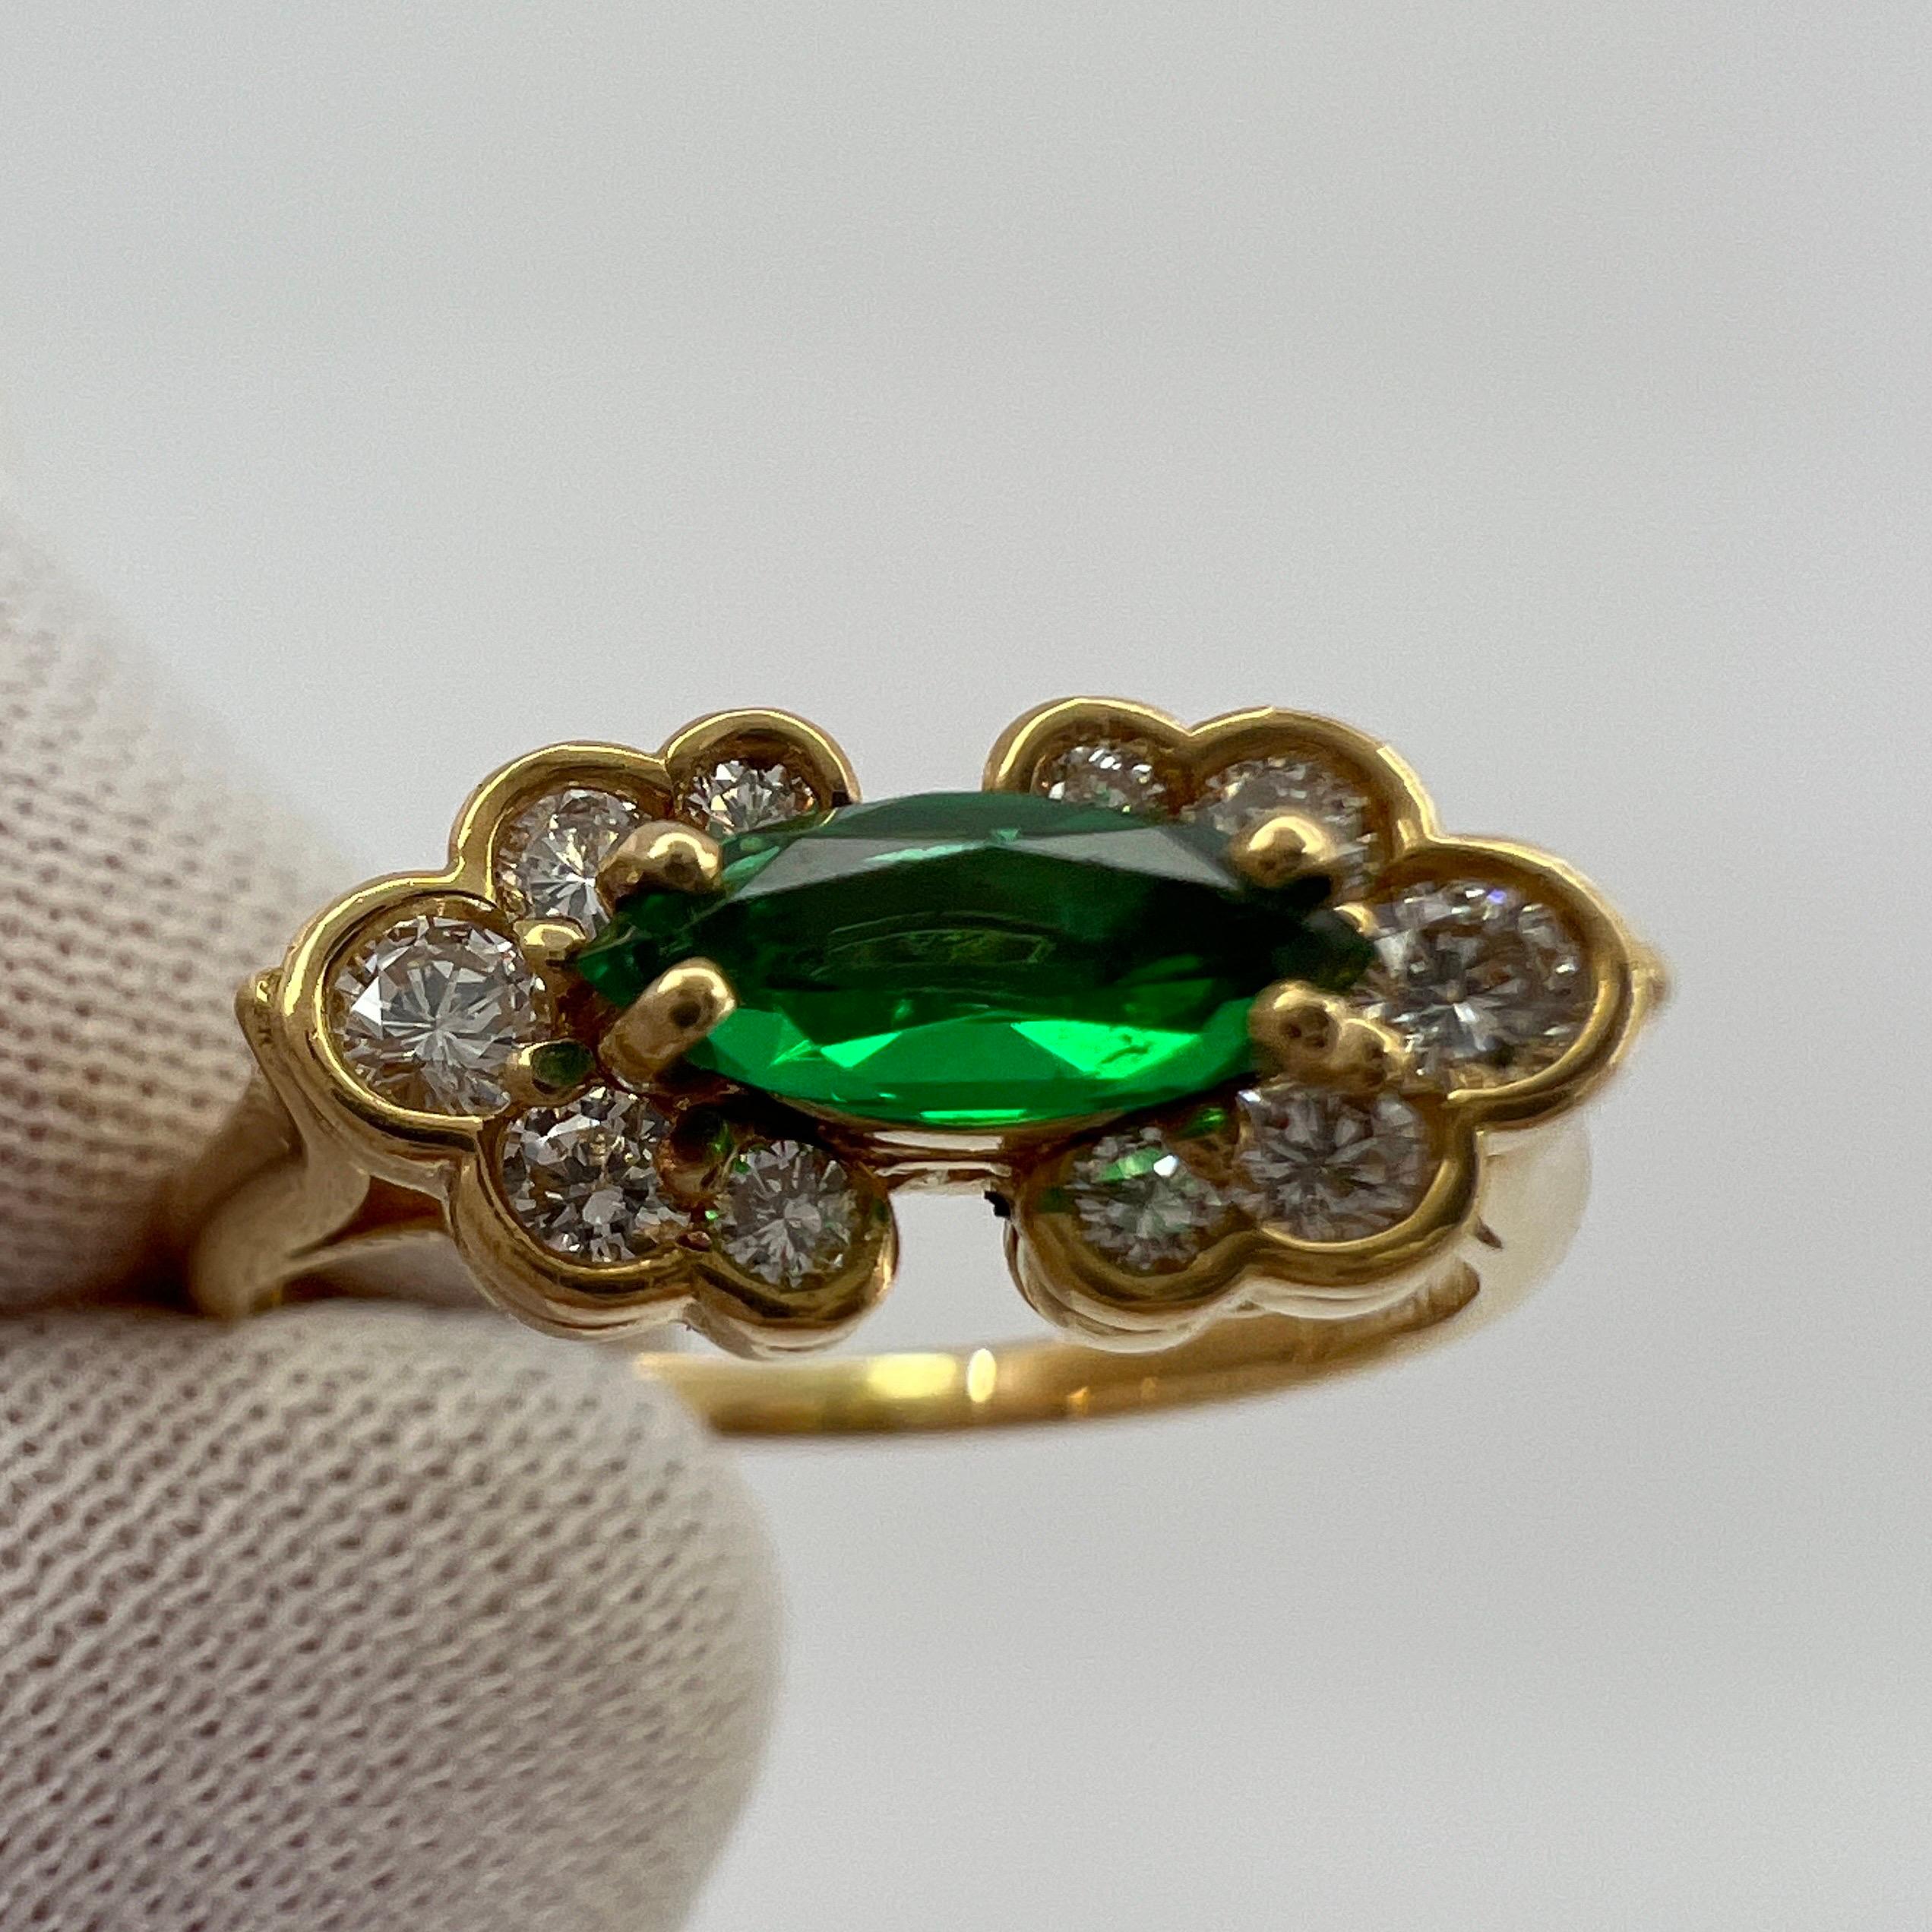 Rare Vintage PIAGET Emerald & Diamond 18k Yellow Gold Marquise Cluster Ring.

Stunning yellow gold PIAGET ring set with a beautiful 7.2x3.1mm marquise cut centre emerald with a fine vivid green colour, very good cut and excellent clarity. Some small